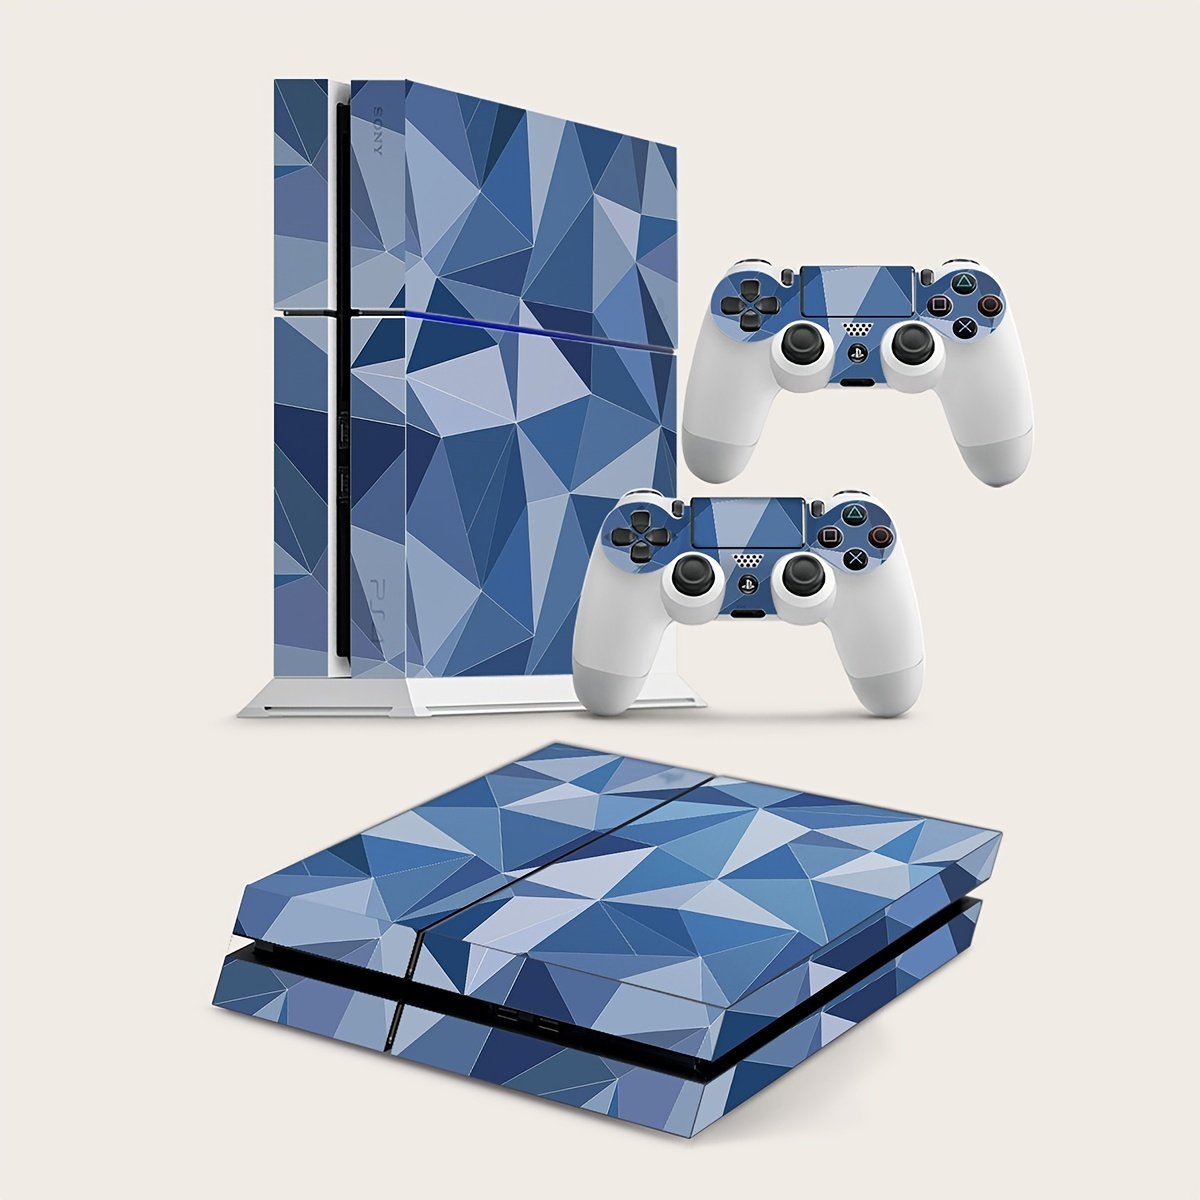  PS5 Skin for Console and Controller, Vinyl Sticker Decal Cover  for Playstation 5, Whole Body Skin Protector Durable, Scratch Resistant,  Compatible with Playstation 5 Disk Edition, Dark Ninja : Video Games